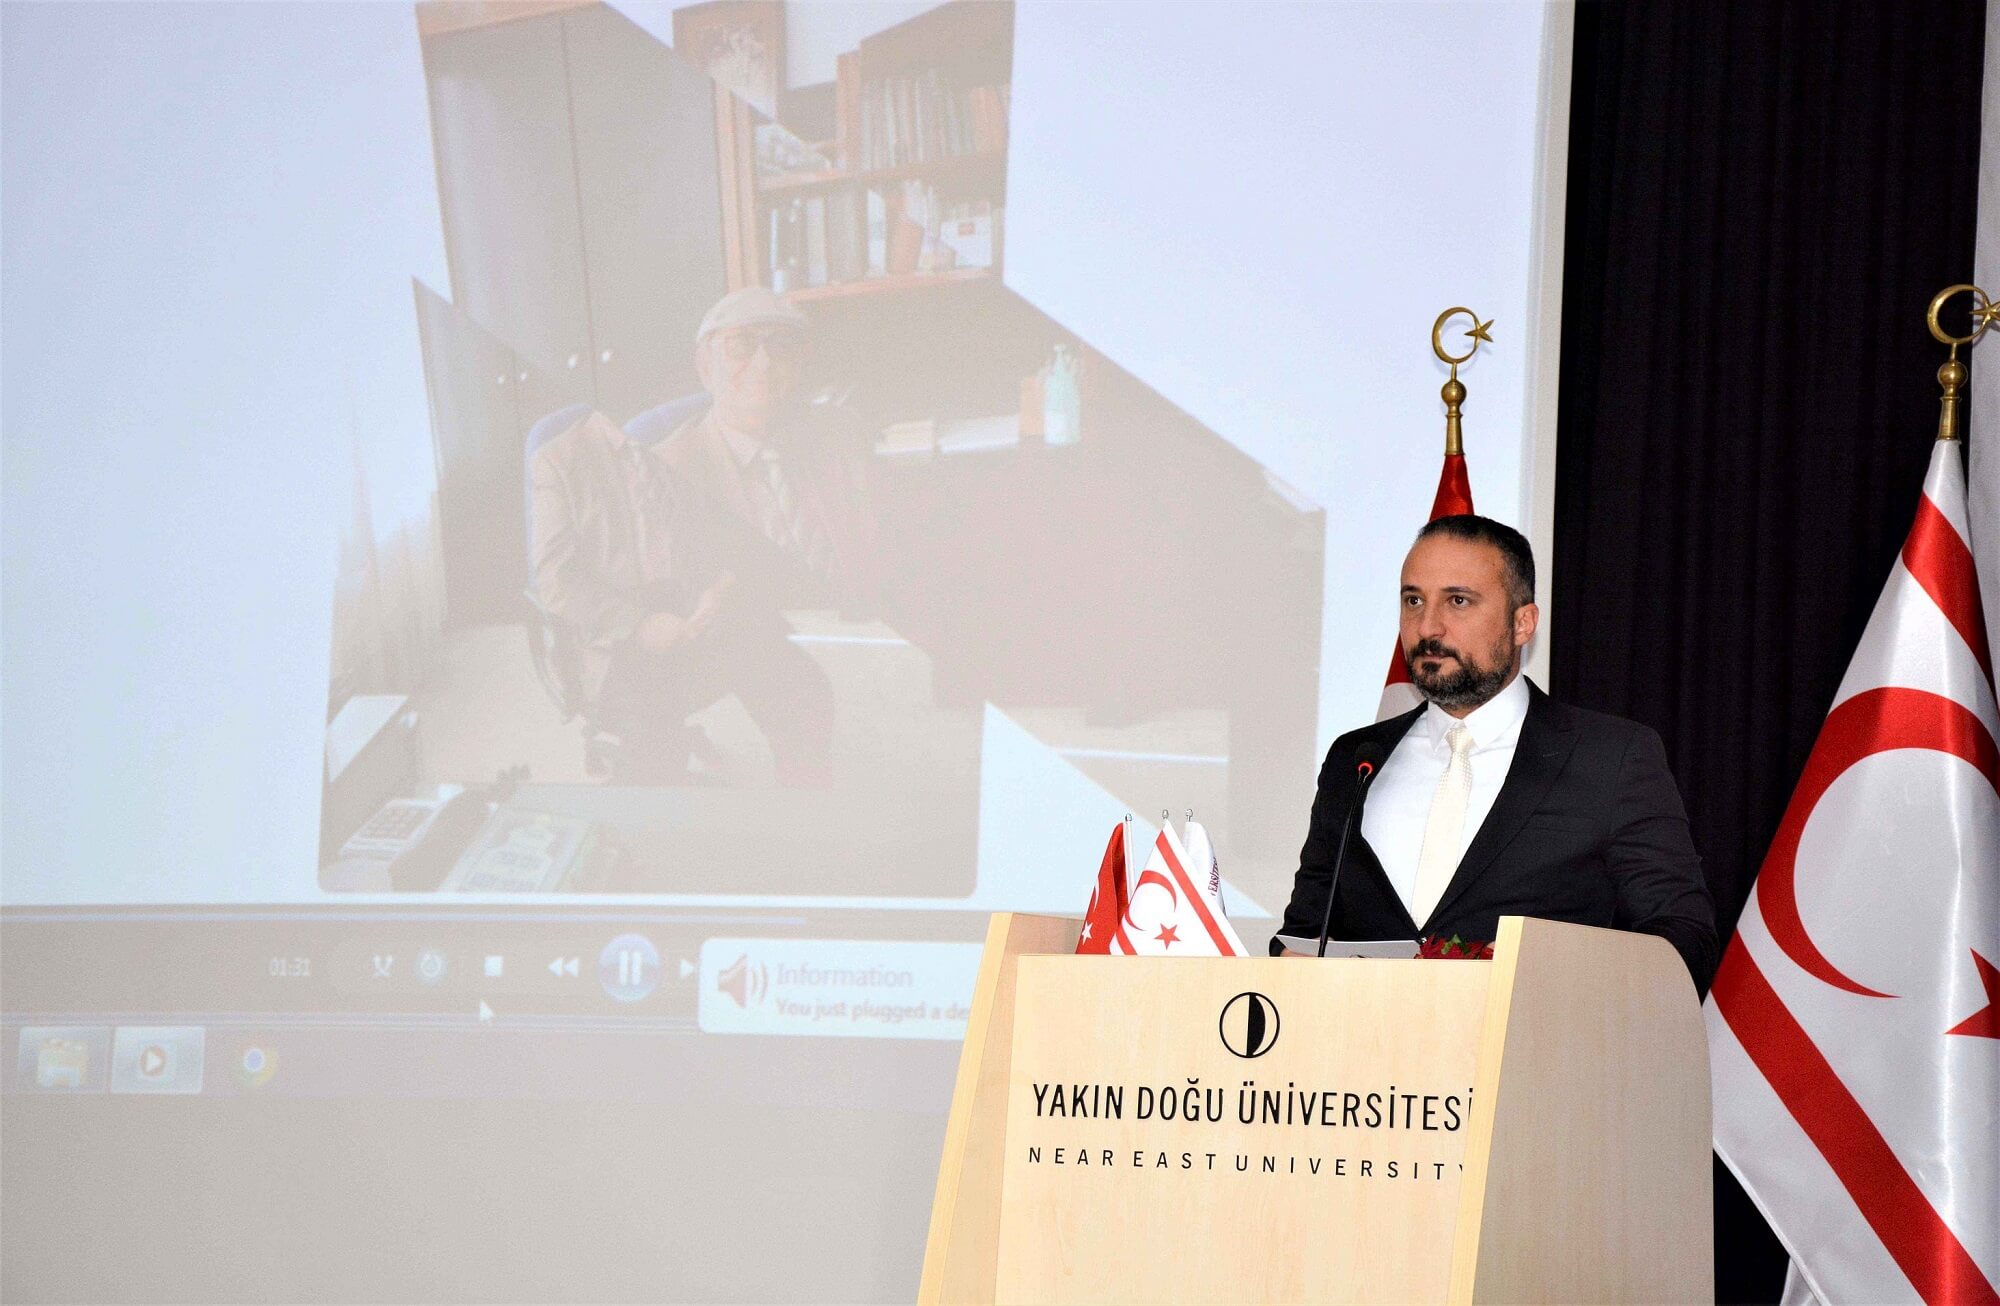 The First Exhibition of the Cyprus Museum of Modern Arts in 2021 held in honor of Prof. Dr. Ümit Hassan opened at the Near East University Grand Library Exhibition Hall.